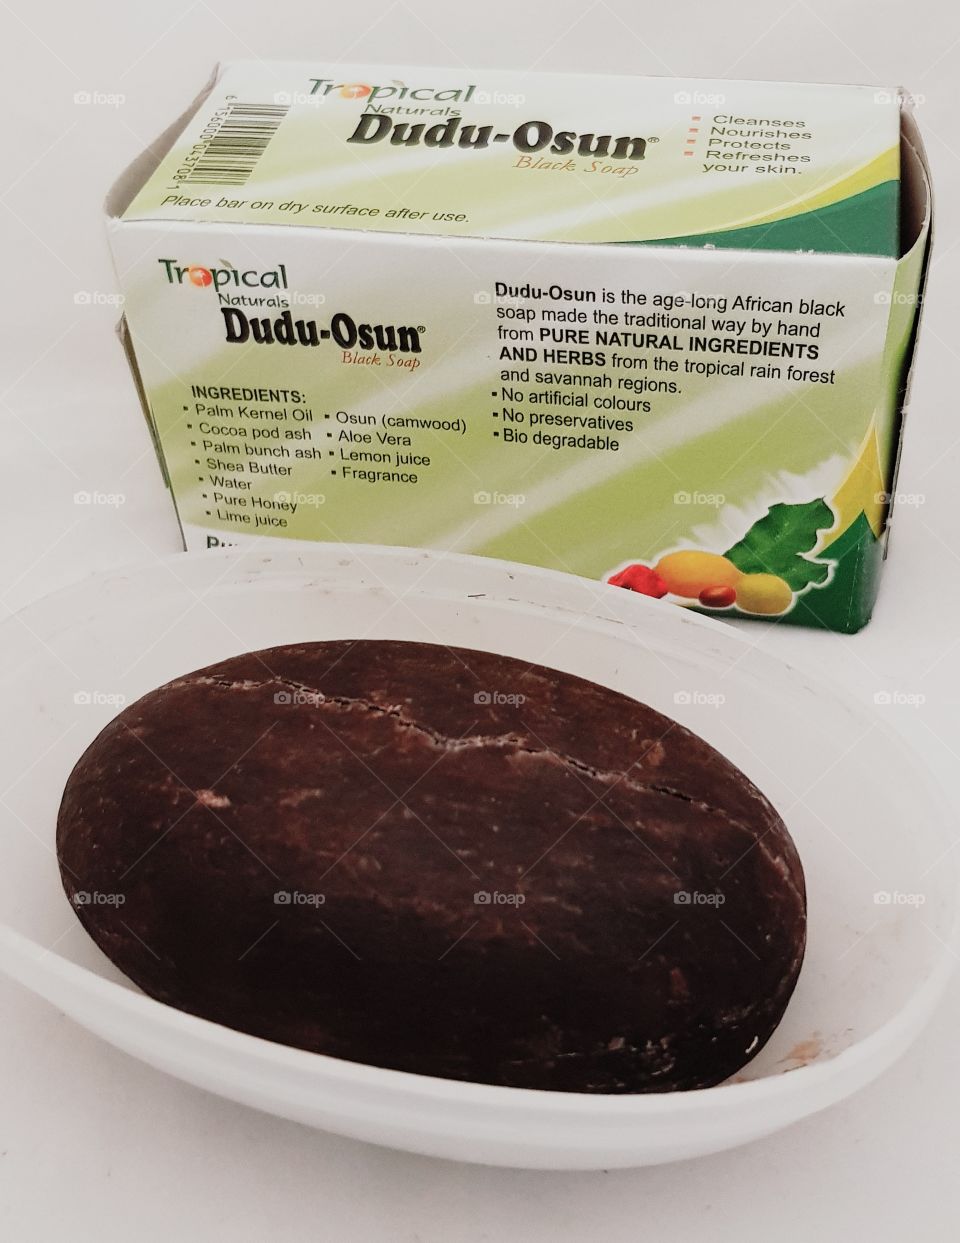 Tropical Naturals Dudu-osun black soap with pure natural ingredients